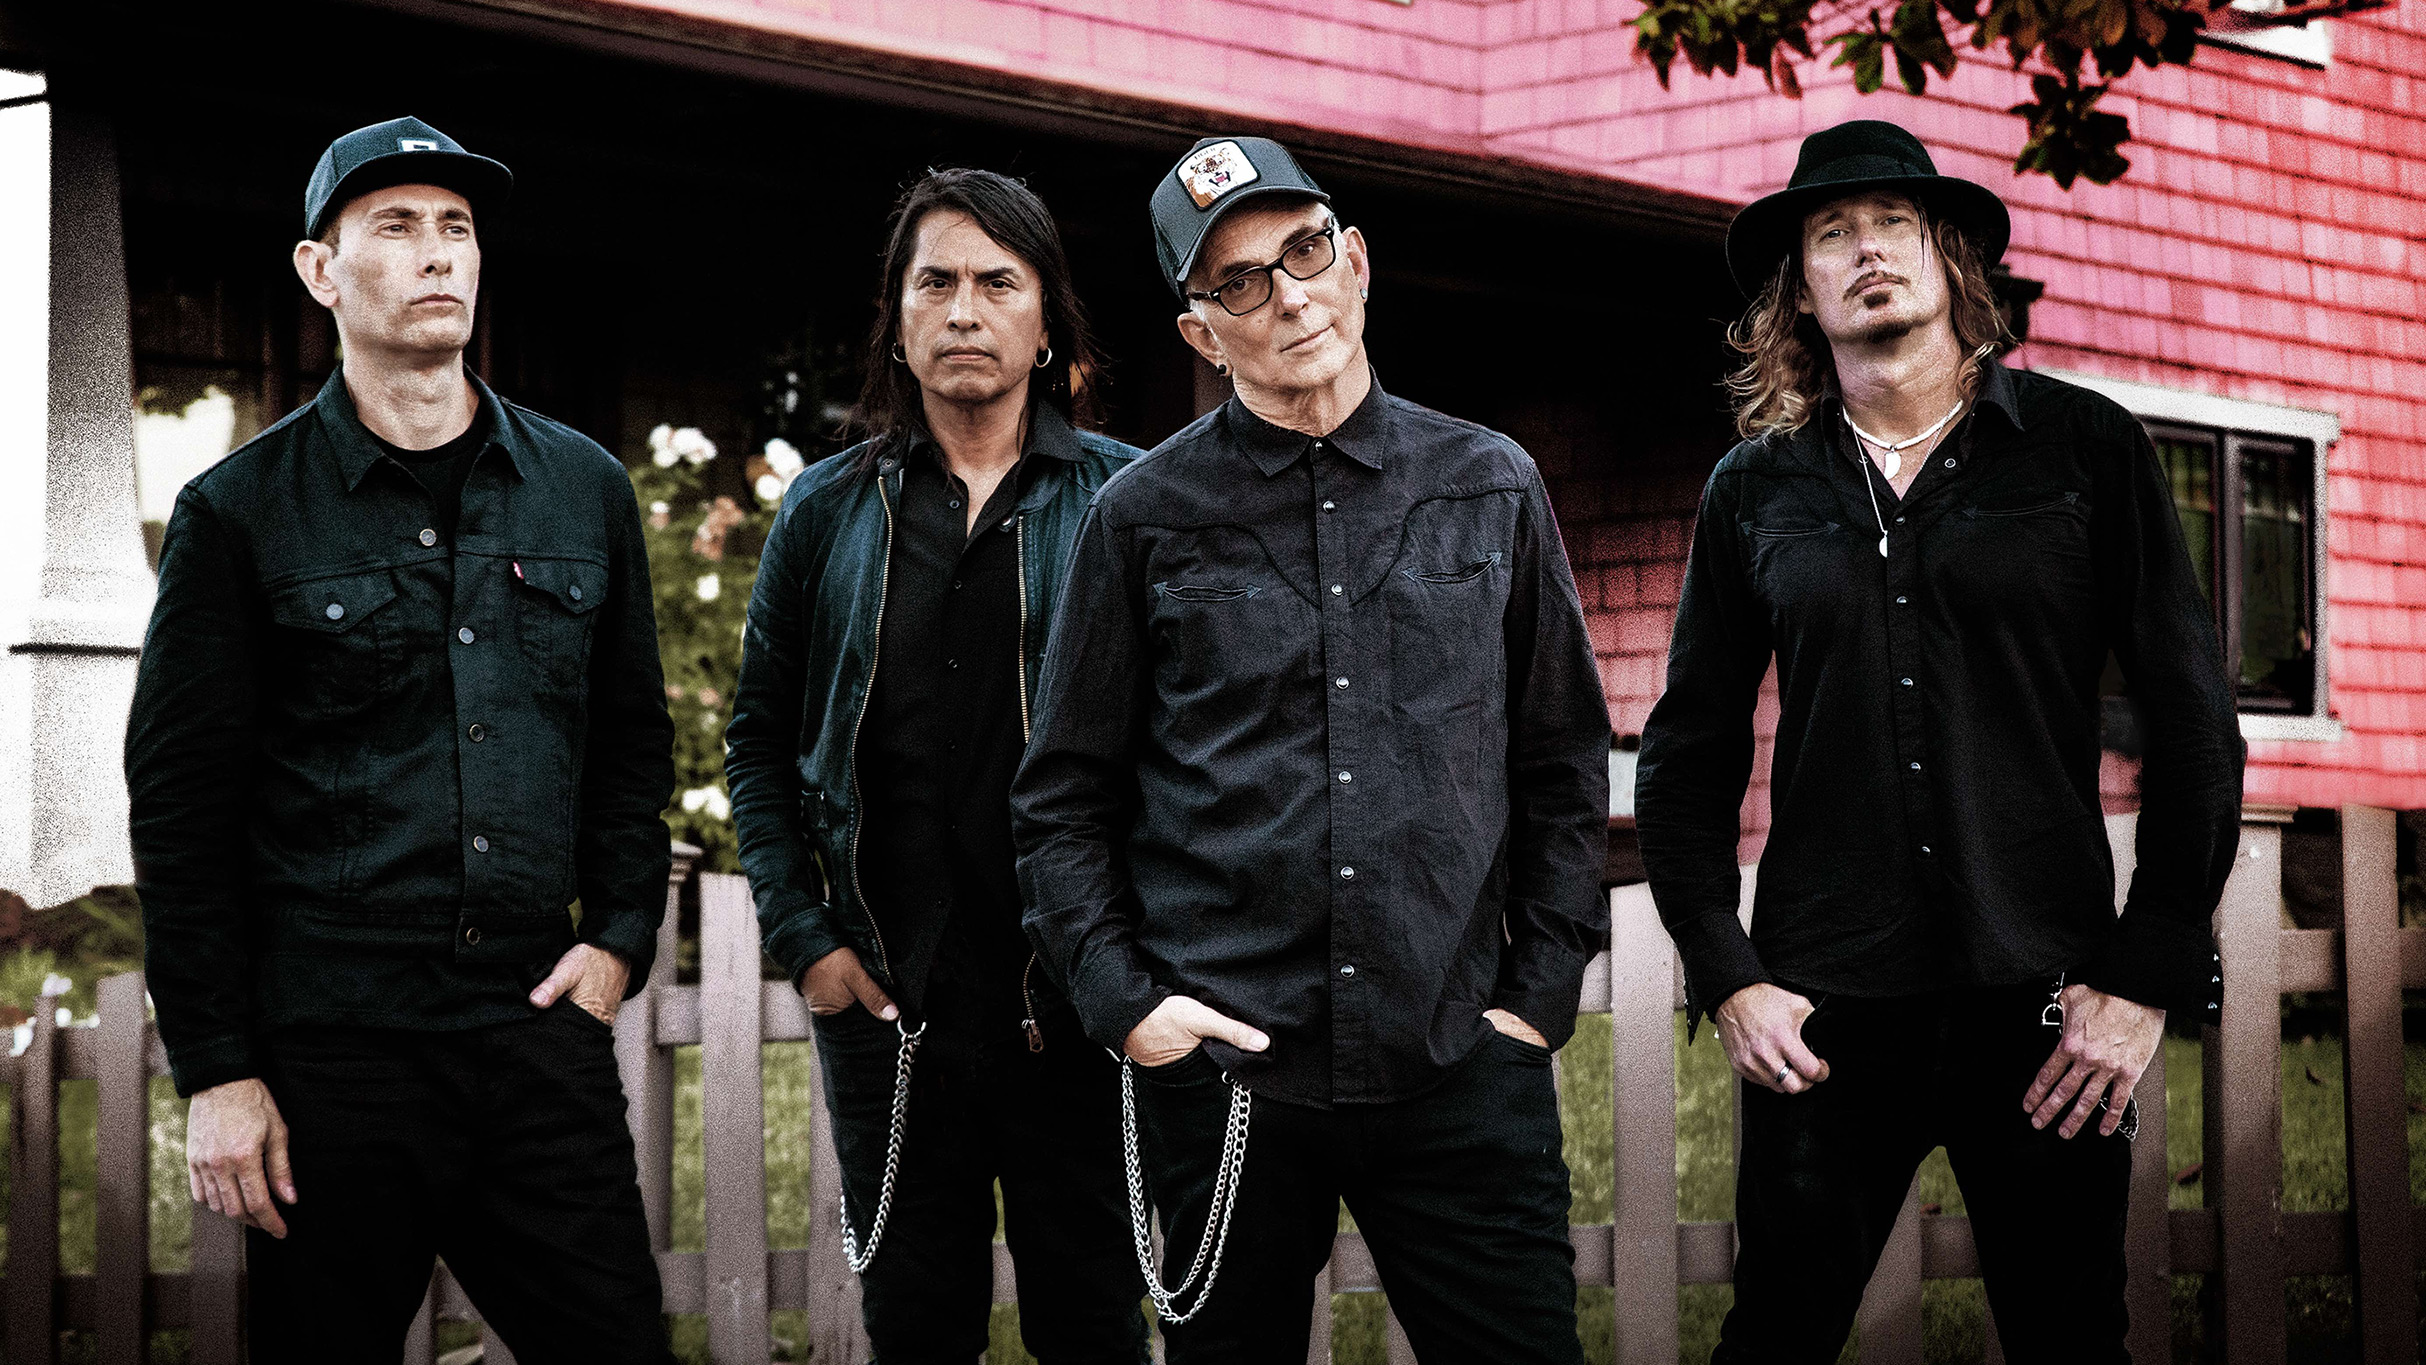 Everclear, Marcy Playground, Jimmie's Chicken Shack